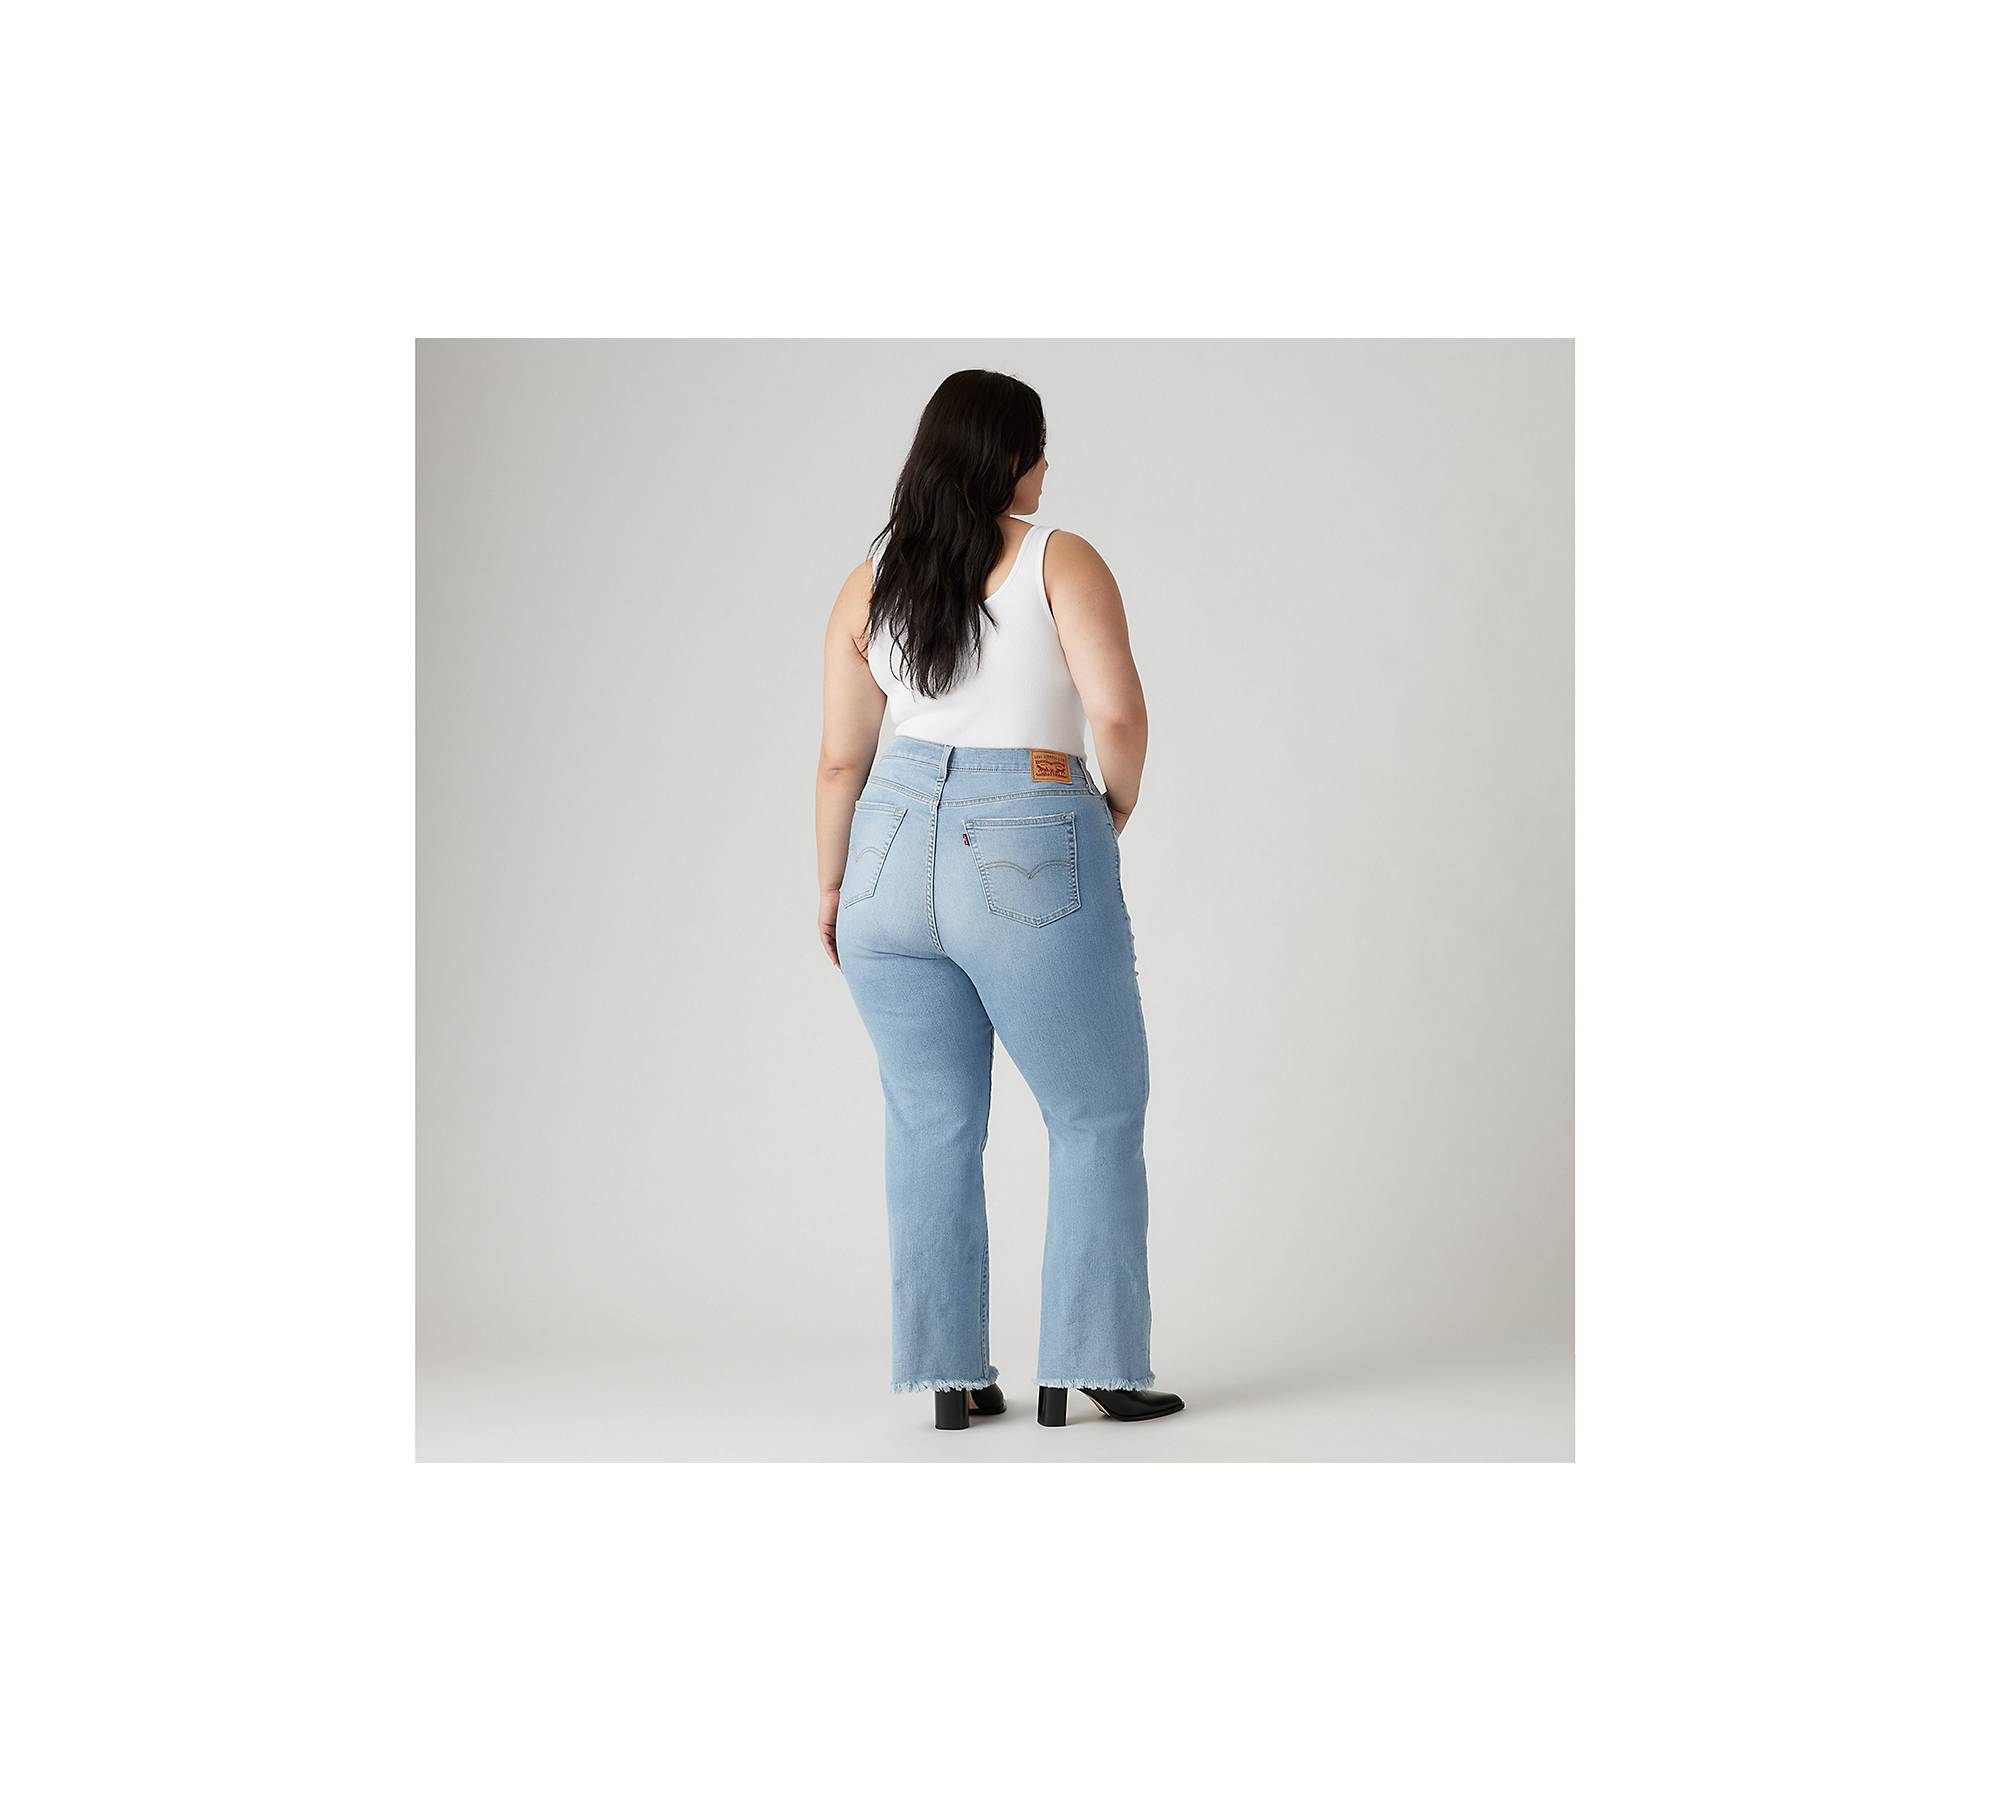 Women's High Waisted & Tummy Slimming Jeans - 90219Xl - Oly's Home Fashion